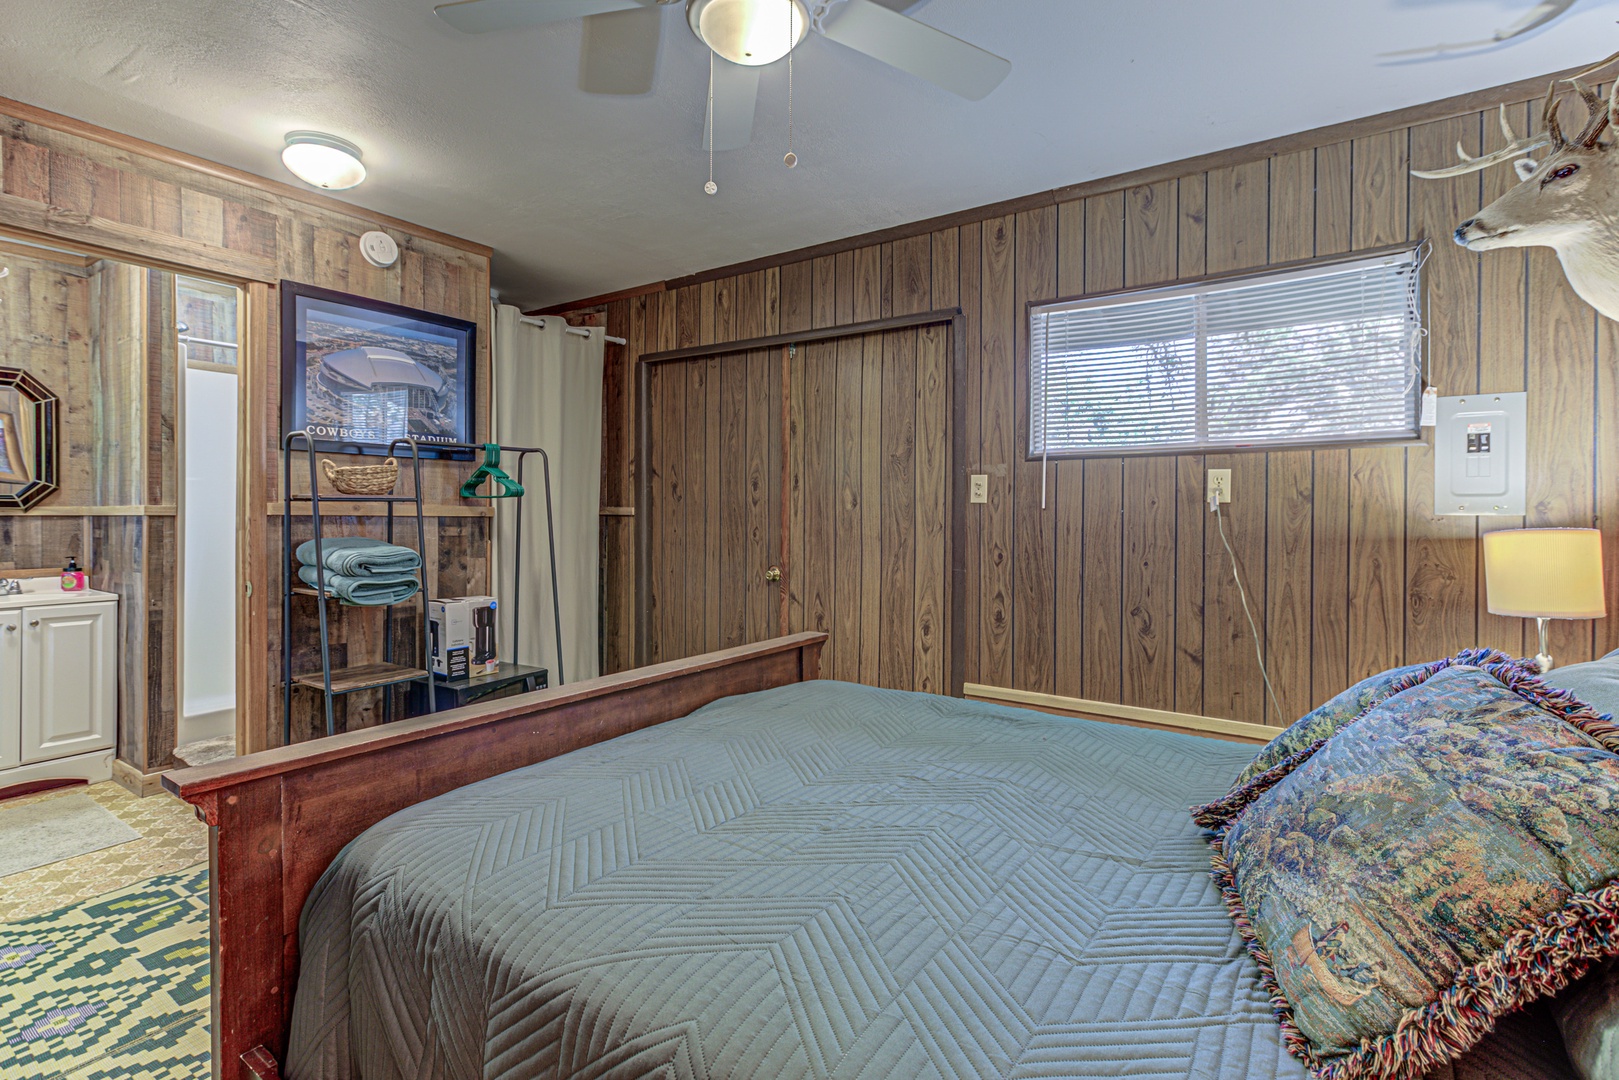 The bungalow bedroom includes a cozy full bed, Smart TV, & ensuite bath